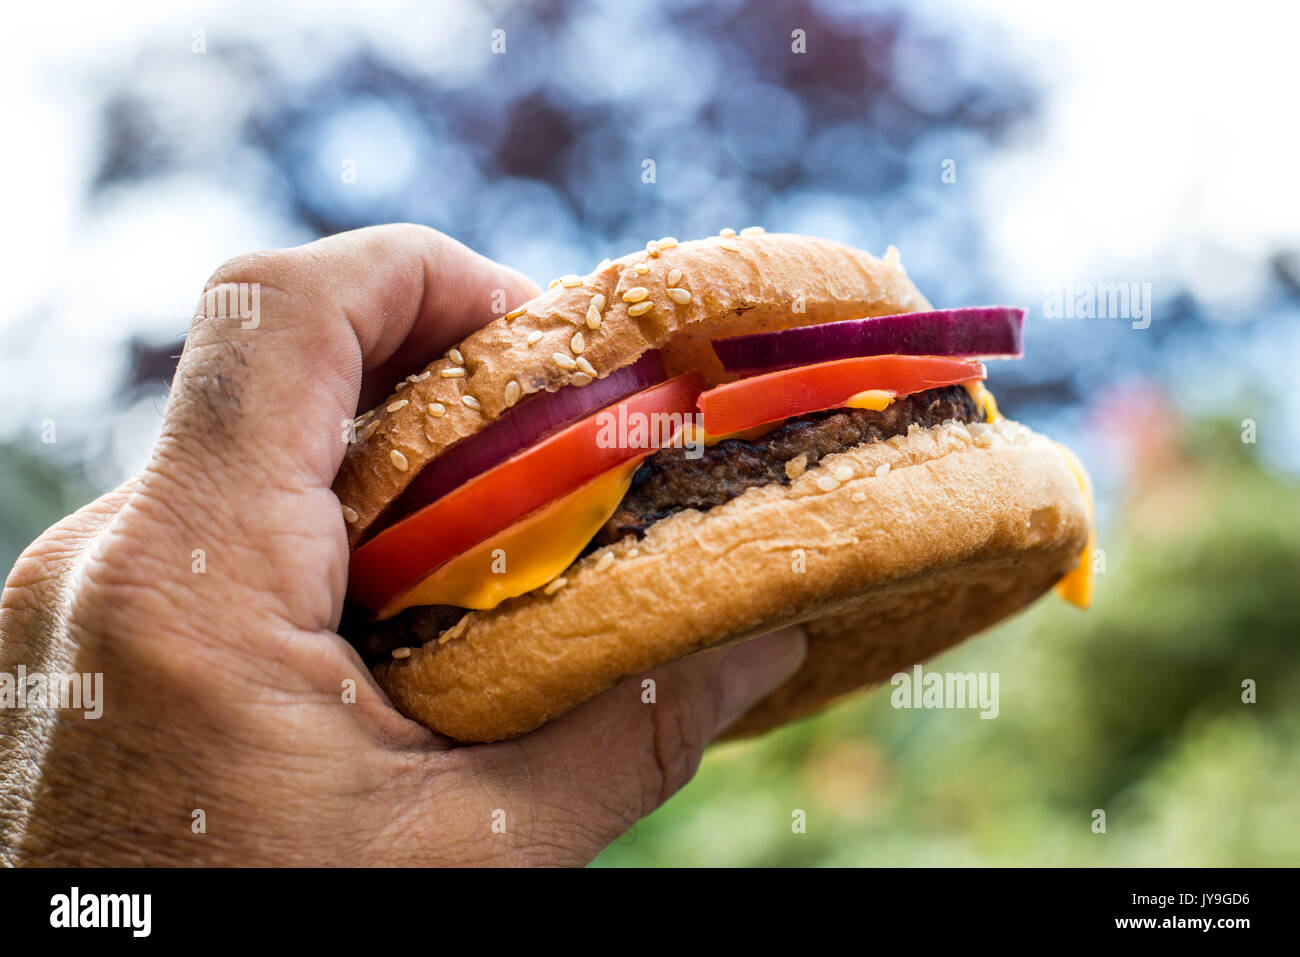 Holding A Quarter Pound Hamburger or Beefburger in a Seame Bread Bun With Salad Stock Photo